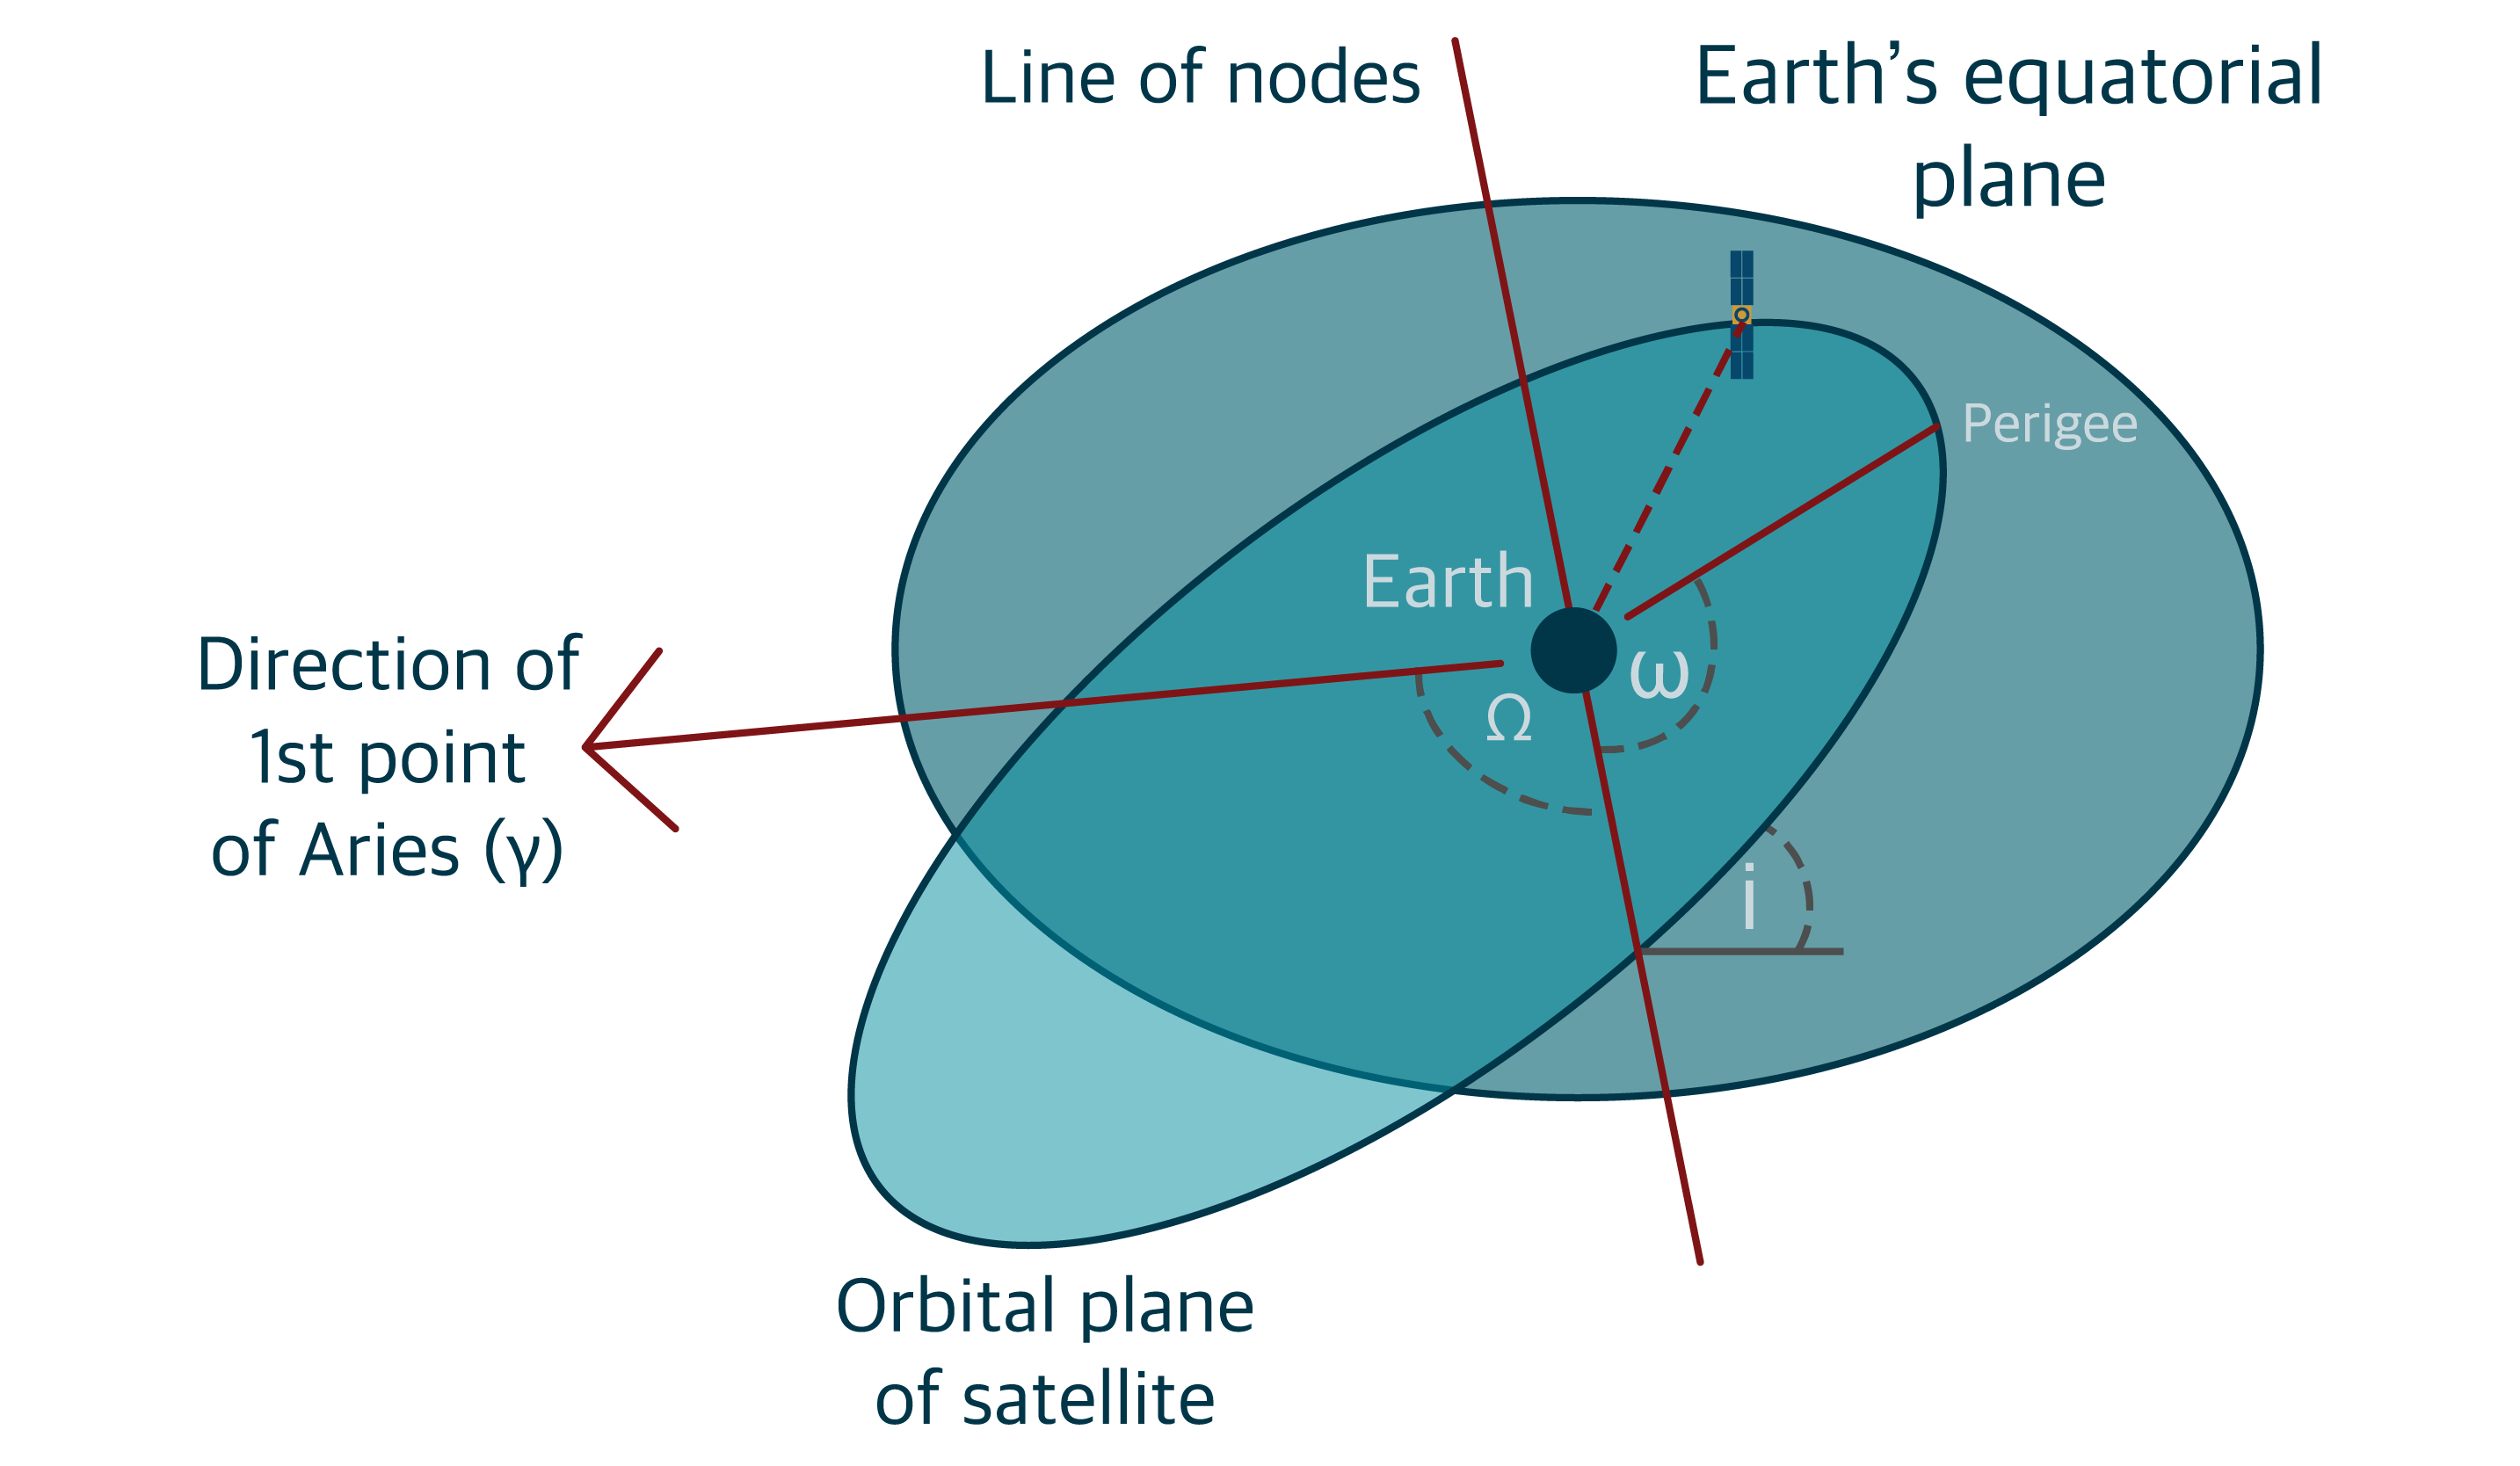 The Keplerian elements used to describe orbits. The diagram highlights the direction of first point of Aries, orbital plane of satellite, line of nodes and earth's quatorial plane